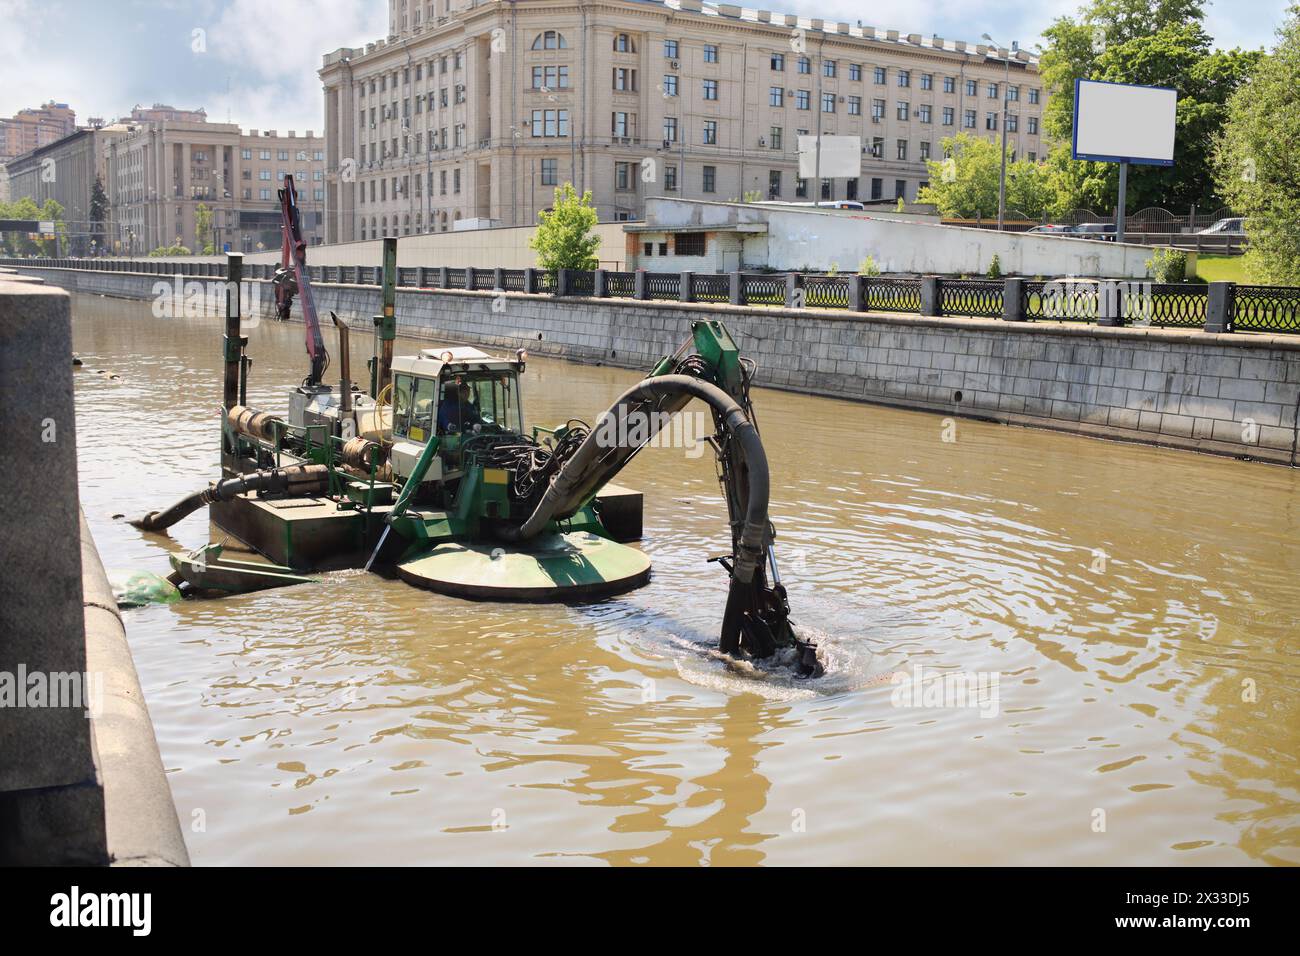 MOSCOW, RUSSIA - MAY 16, 2014: Universal dredge dredging and excavation works in rivers and canals Stock Photo